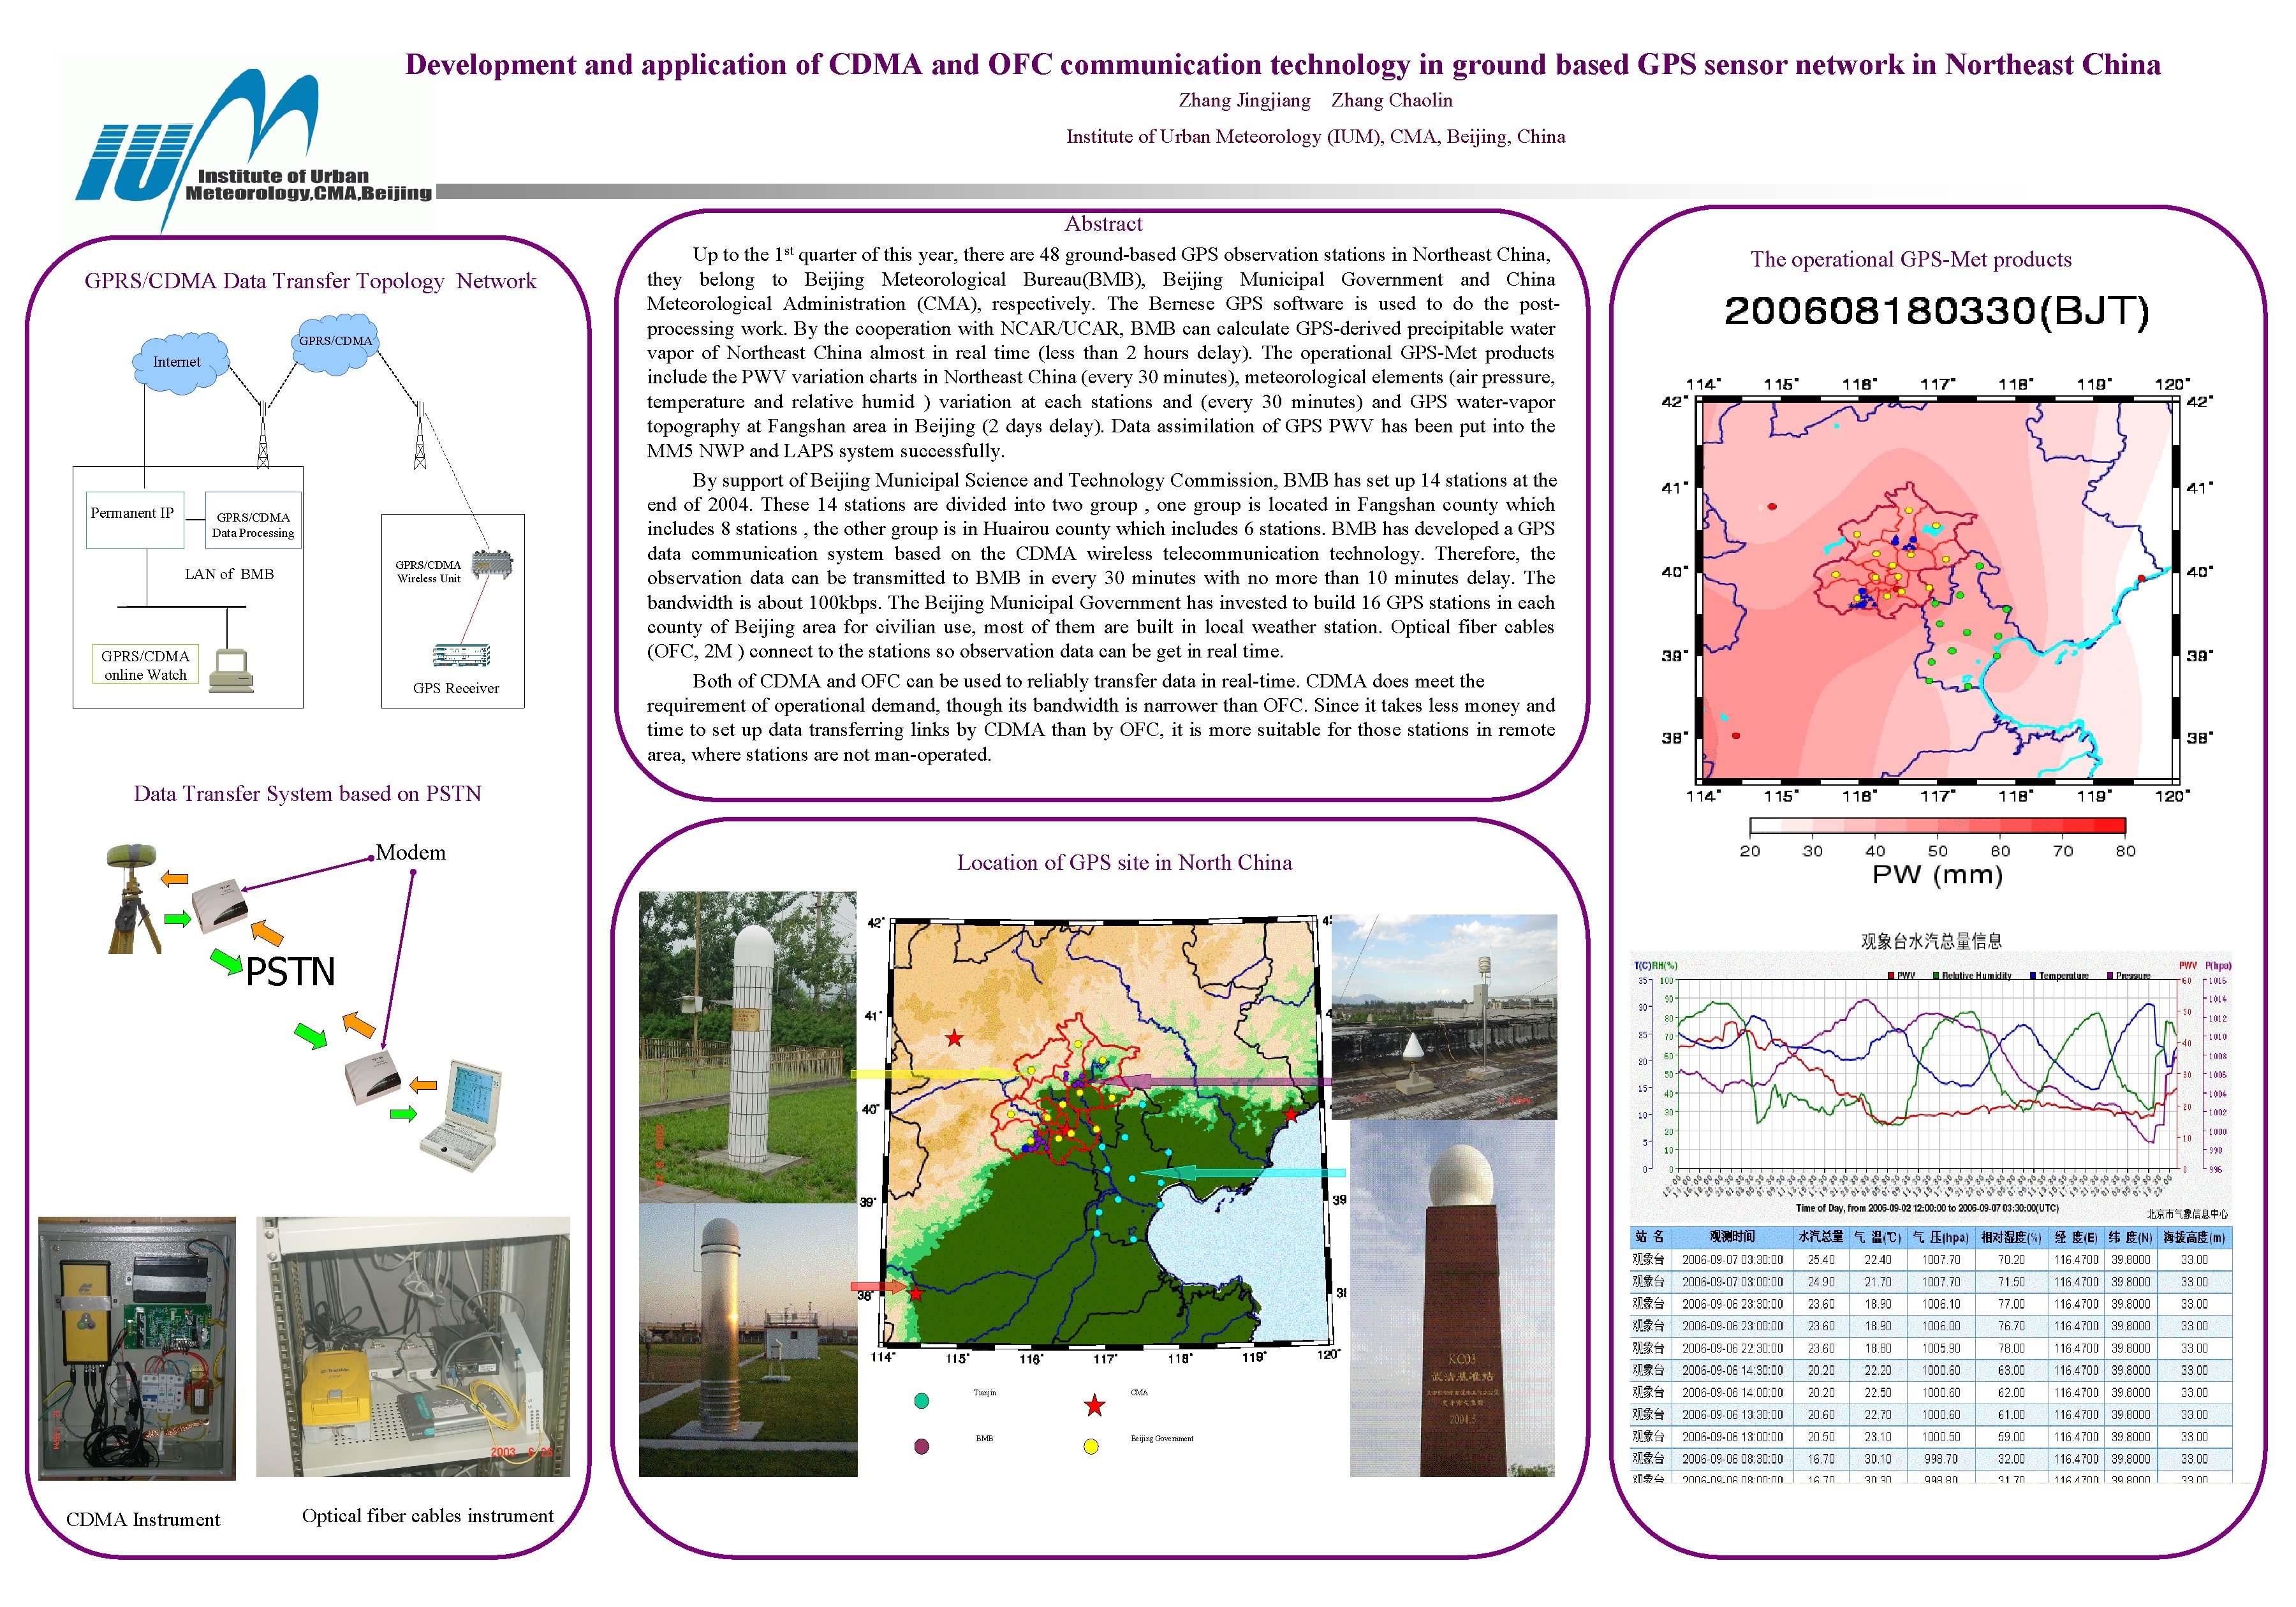 Development and application of CDMA and OFC communication technology in ground based GPS sensor